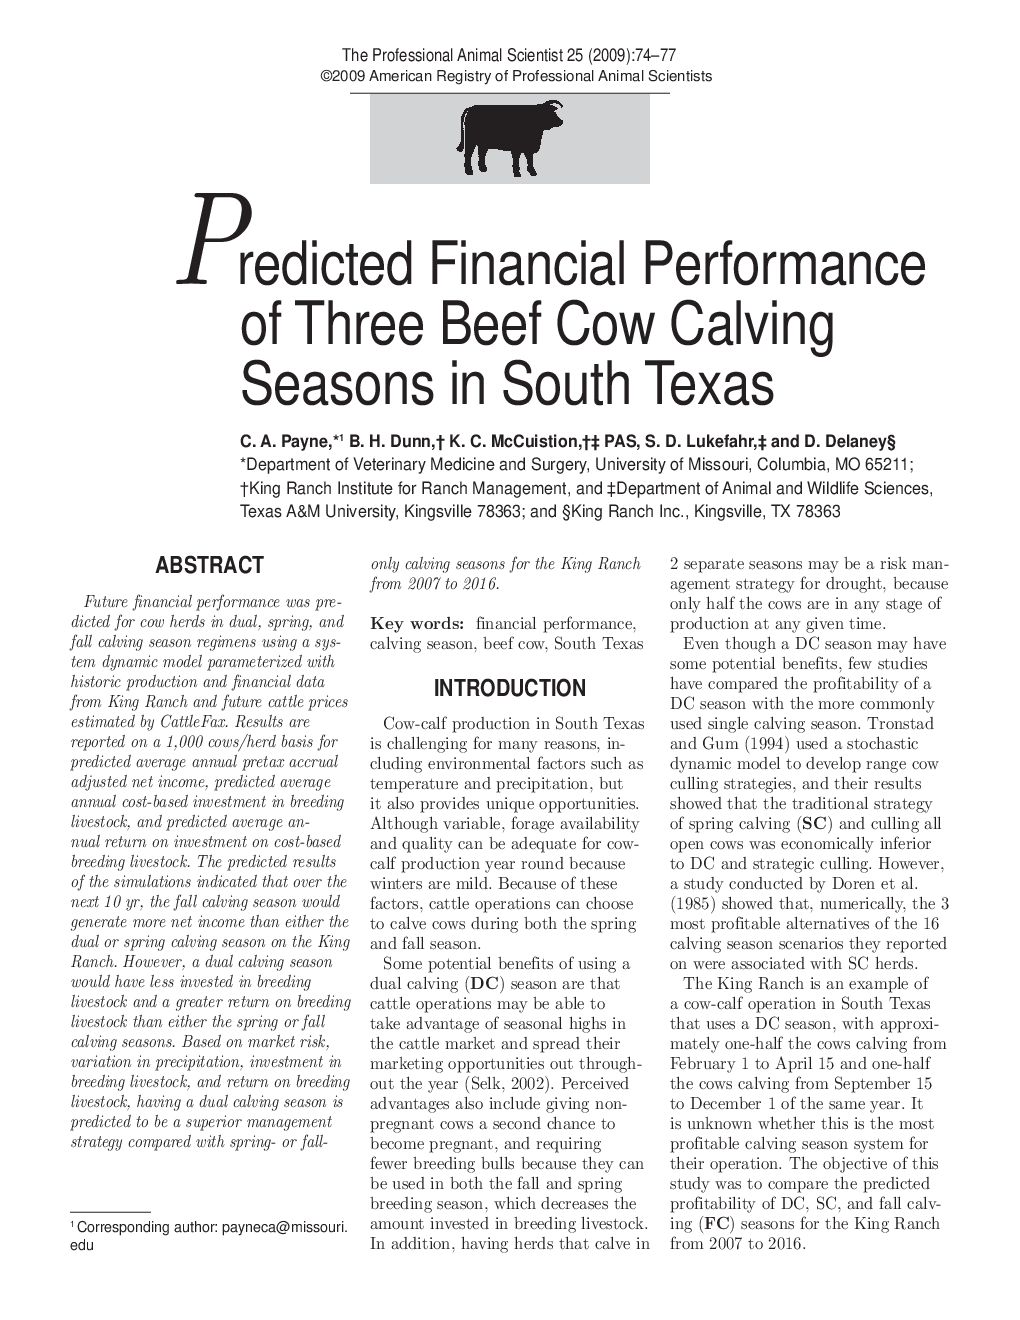 Predicted Financial Performance of Three Beef Cow Calving Seasons in South Texas